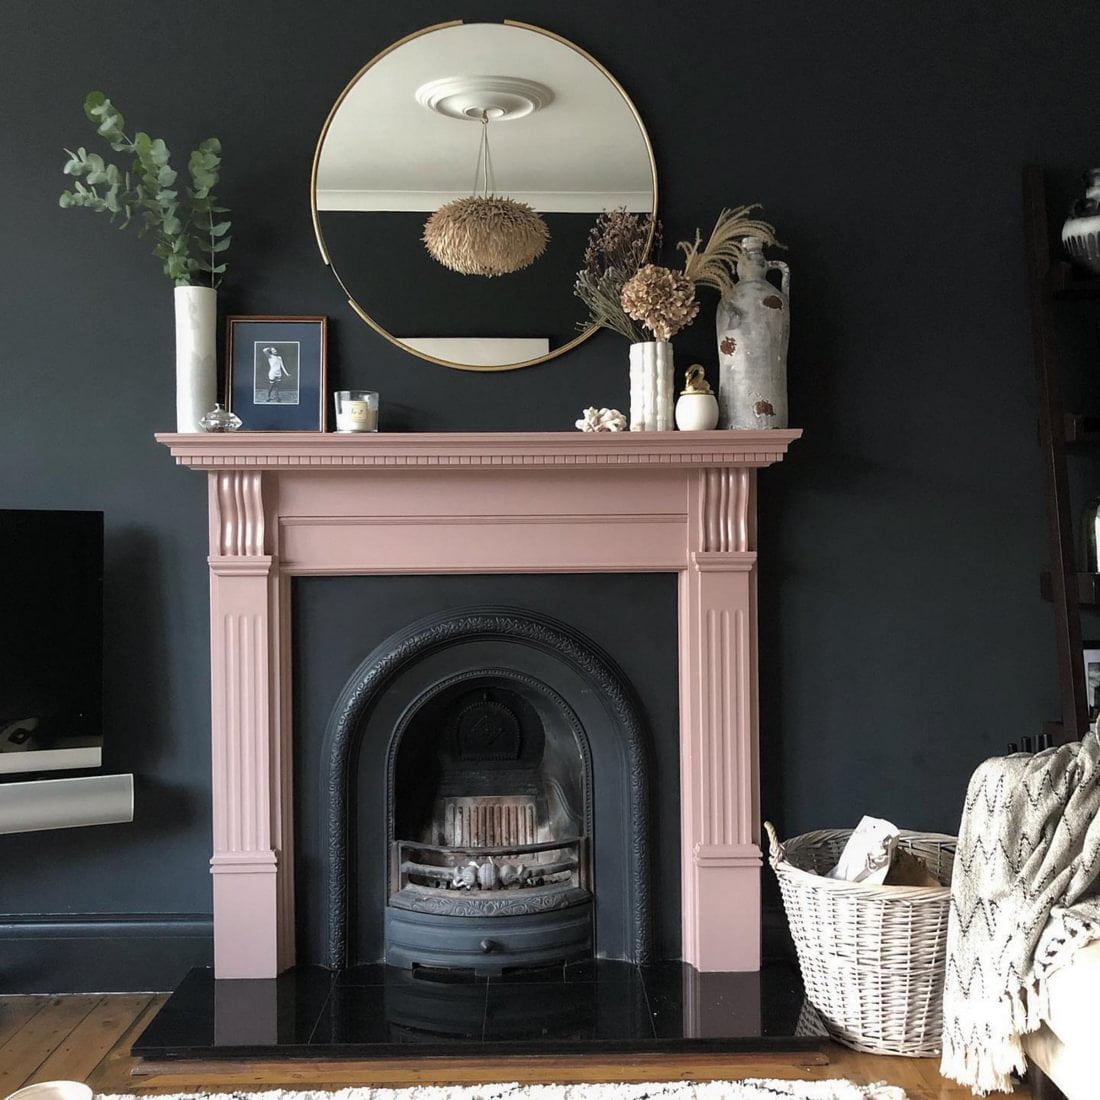 Black interior wall with dusky pink painted victorian style fireplace